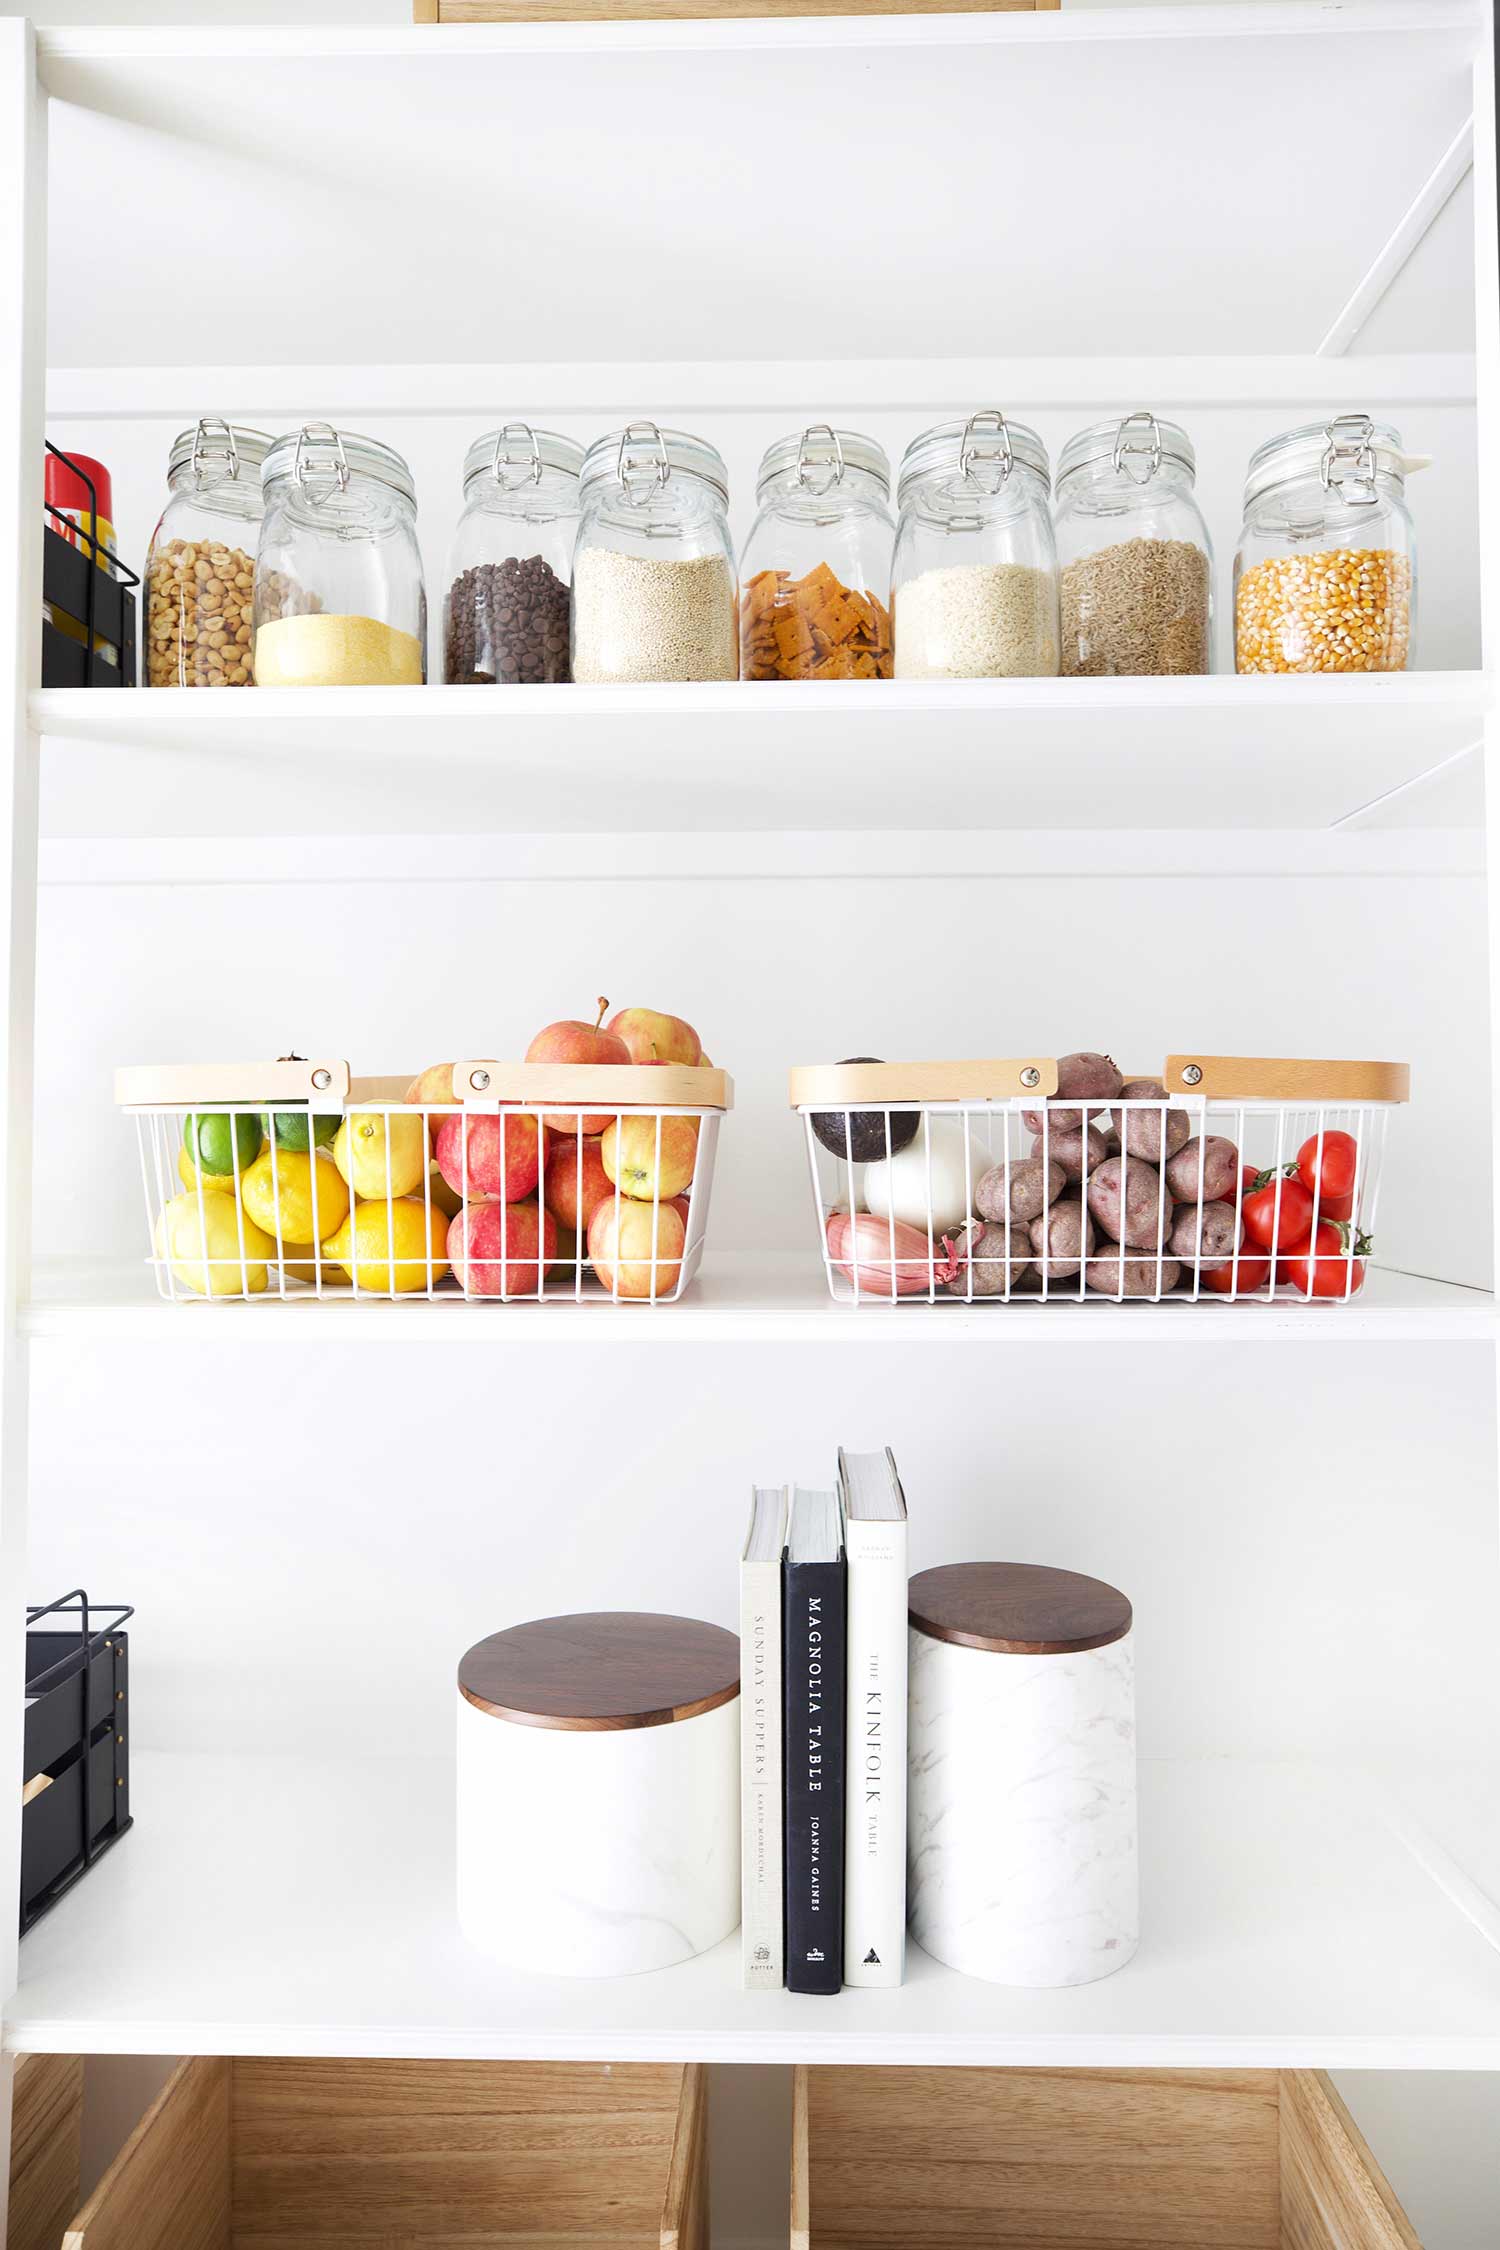 Ikea pull-out baskets for pantry  Pantry design, Kitchen pantry